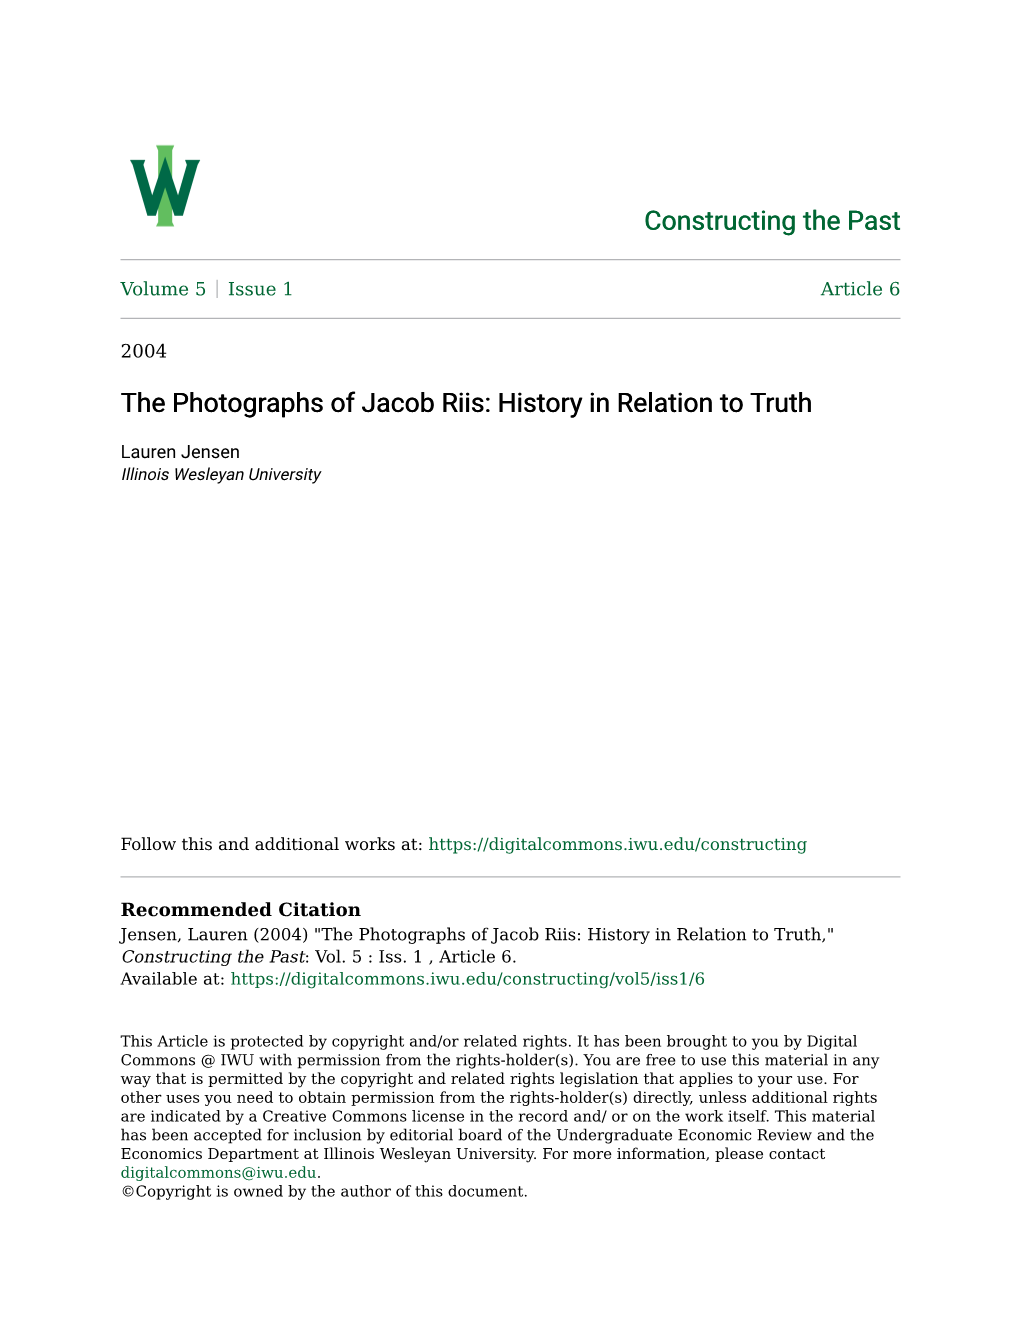 The Photographs of Jacob Riis: History in Relation to Truth